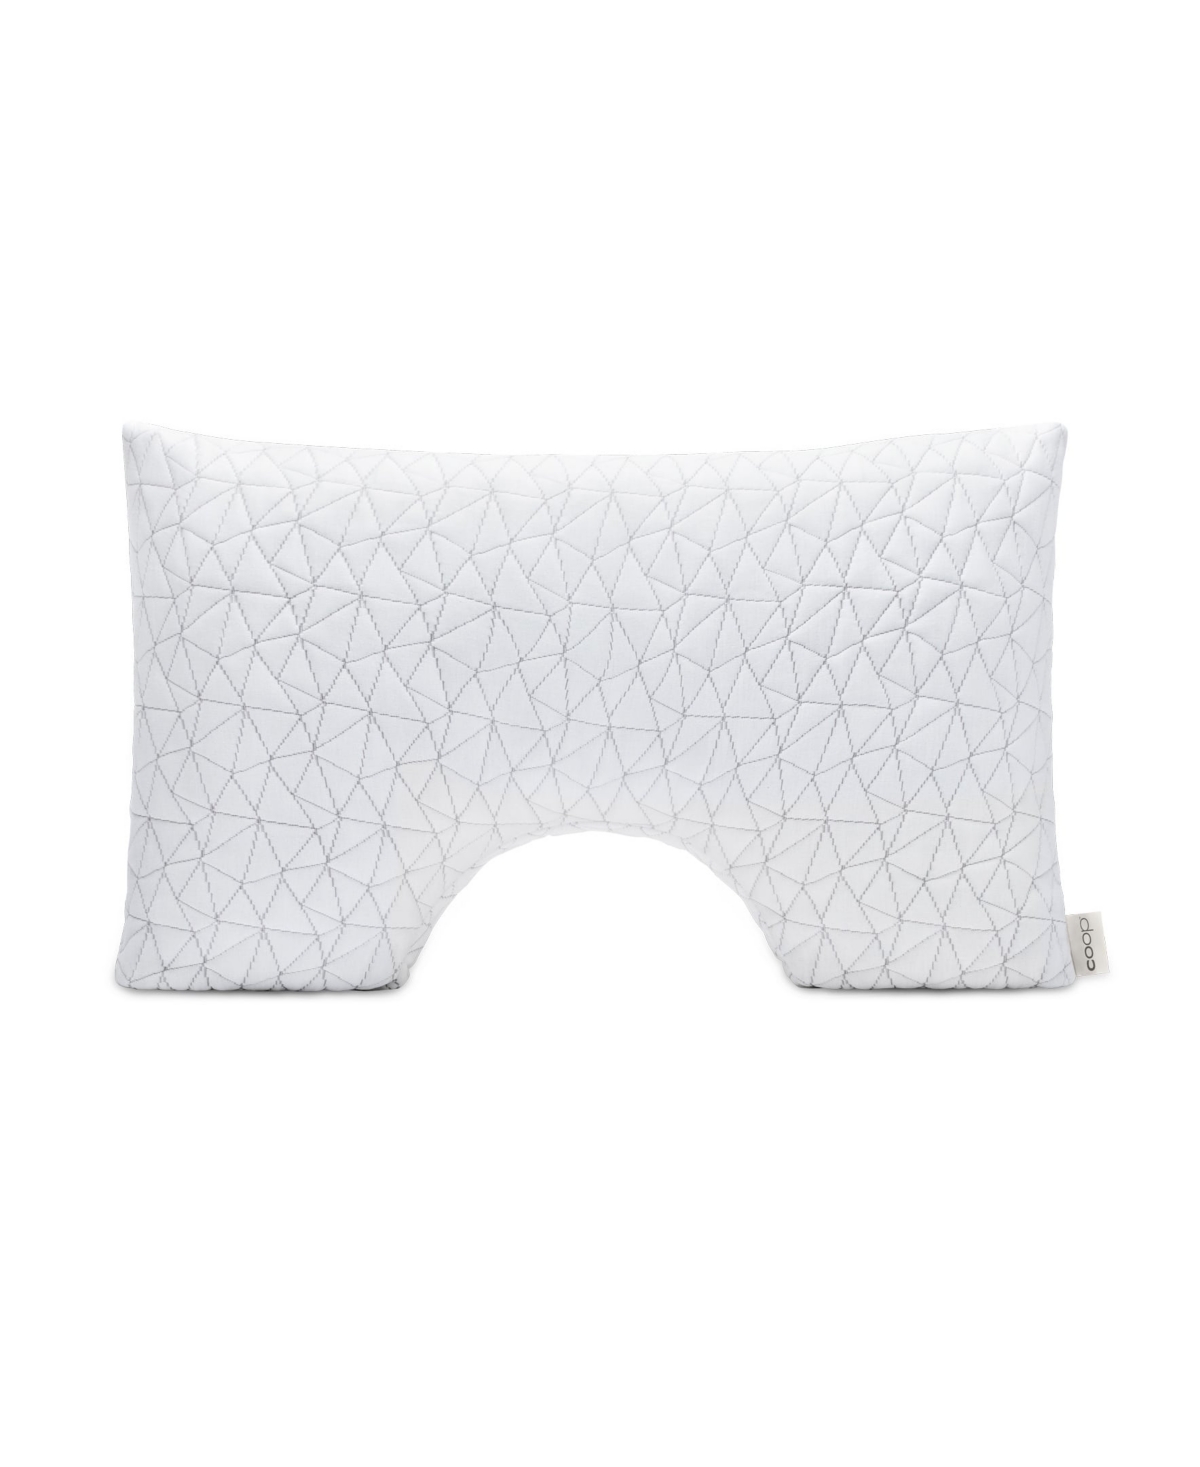 Shop Coop Sleep Goods The Original Cut-out Adjustable Memory Foam Pillow, King In White